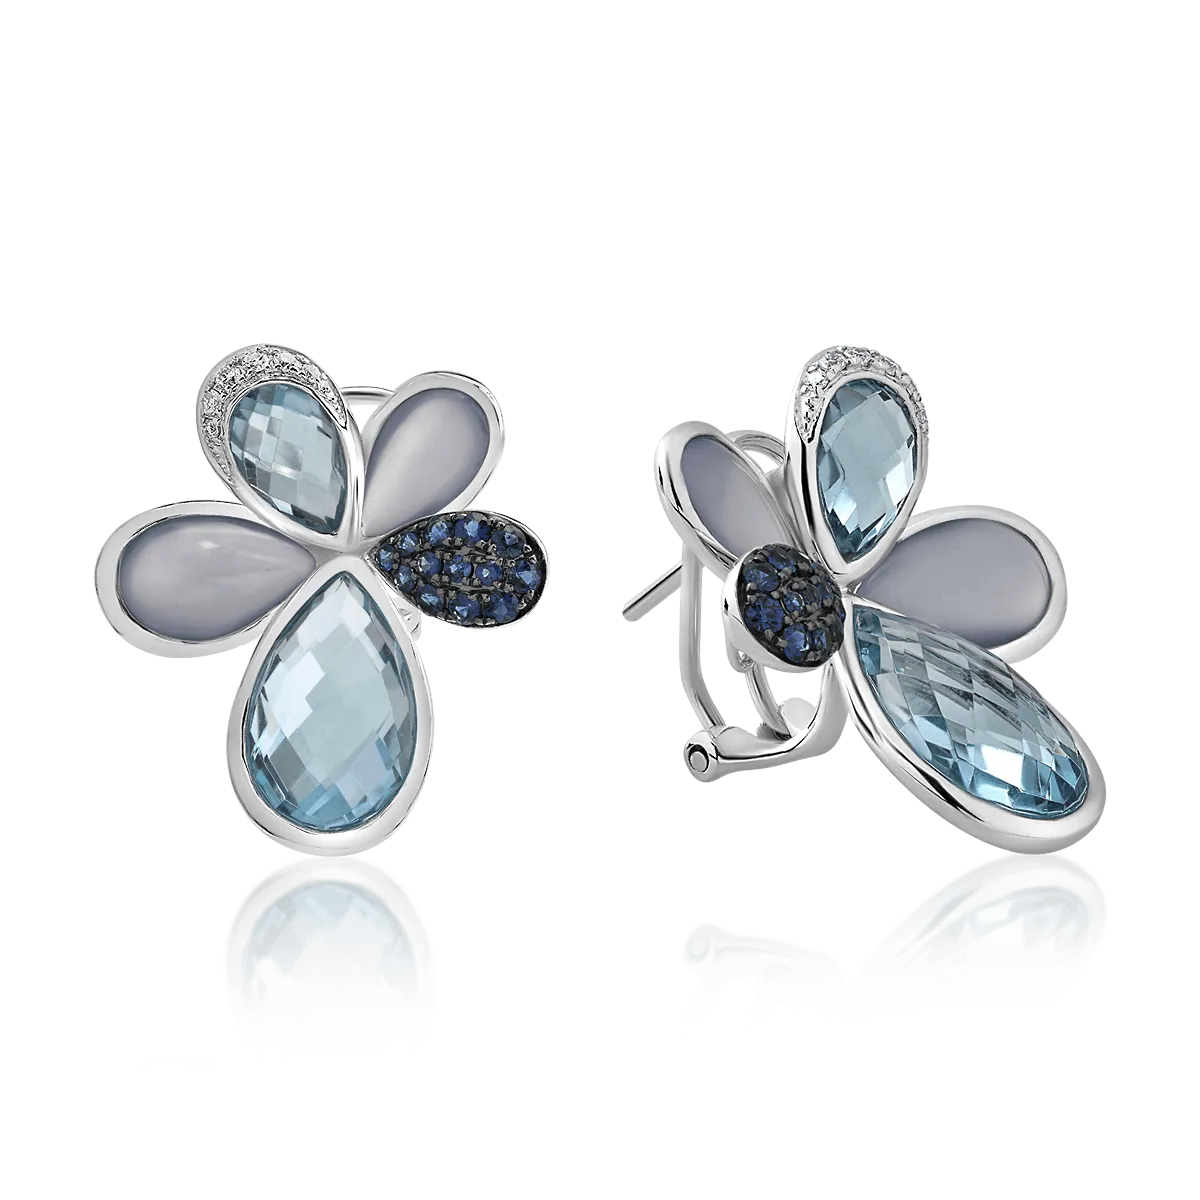 18K white gold earrings with 16.26ct precious and semiprecious stones